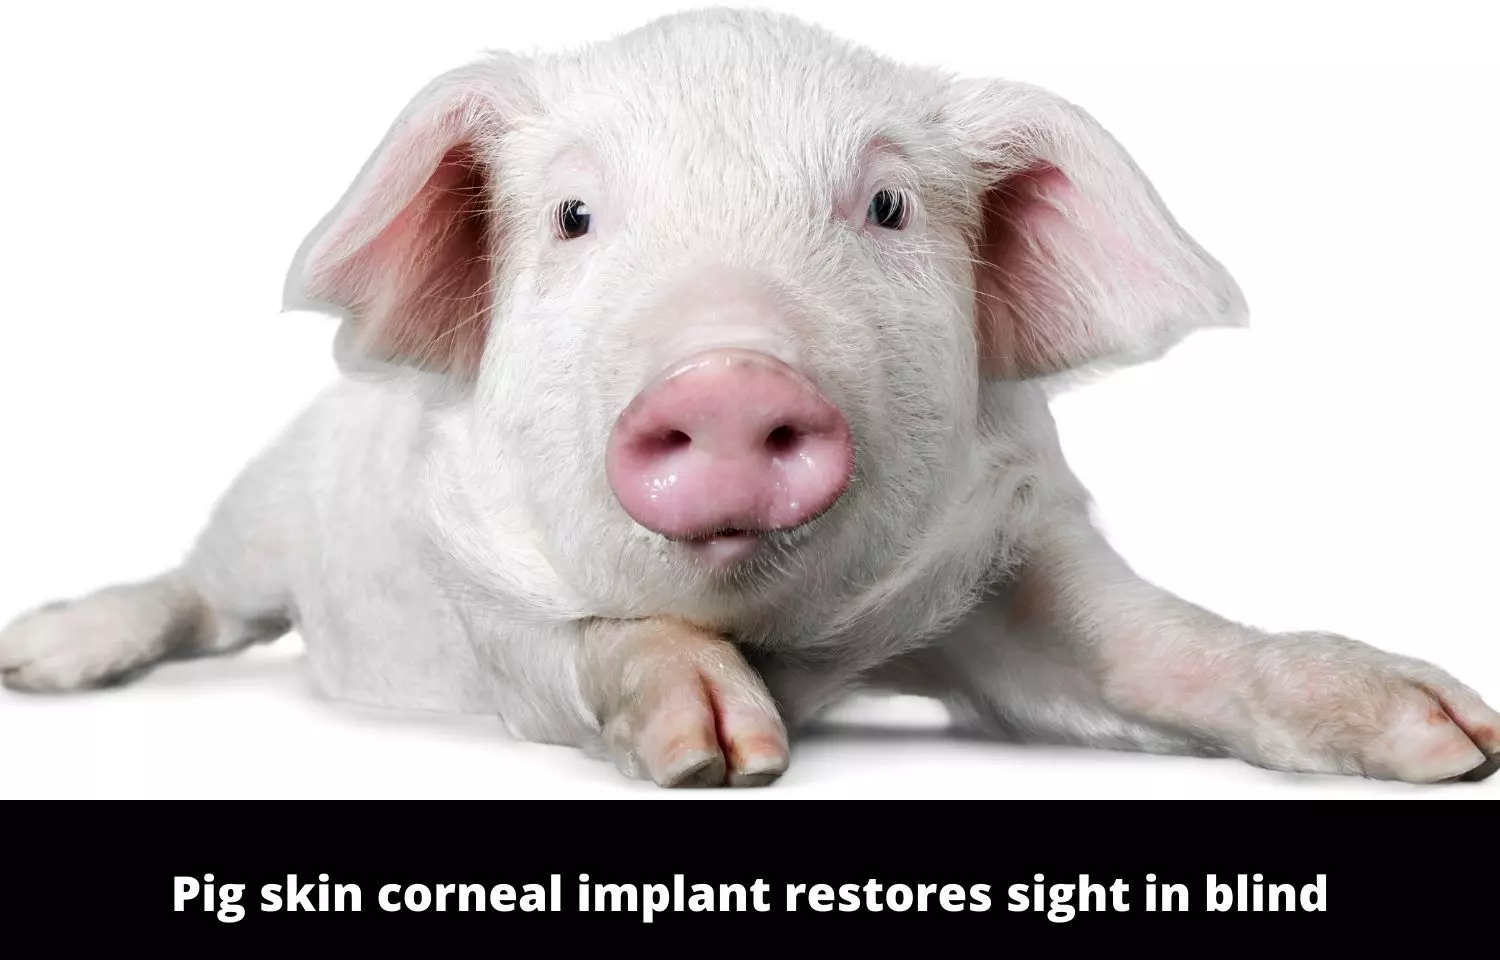 Pig skin corneal implant restores sight in blind, visually impaired